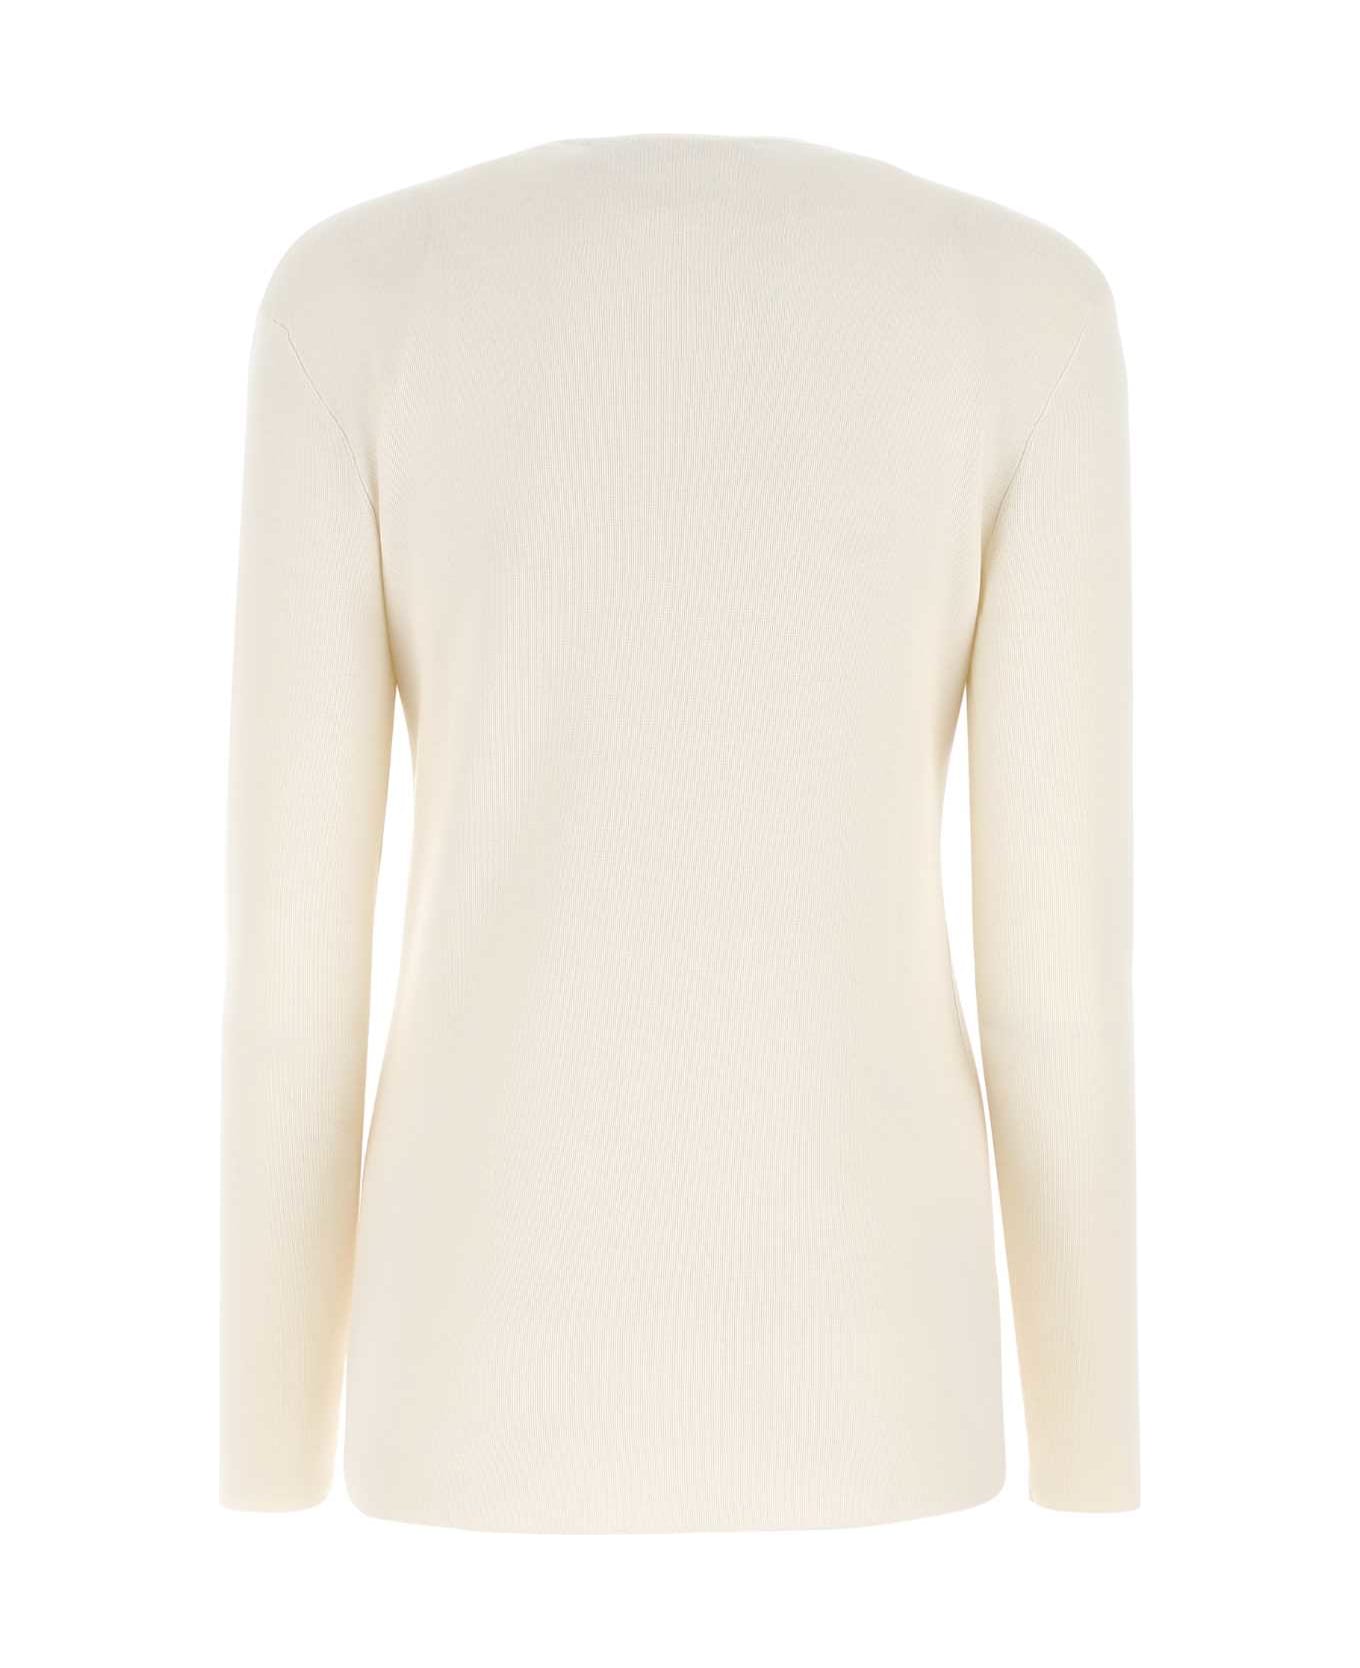 Gucci Ivory Cashmere Top - White フリース